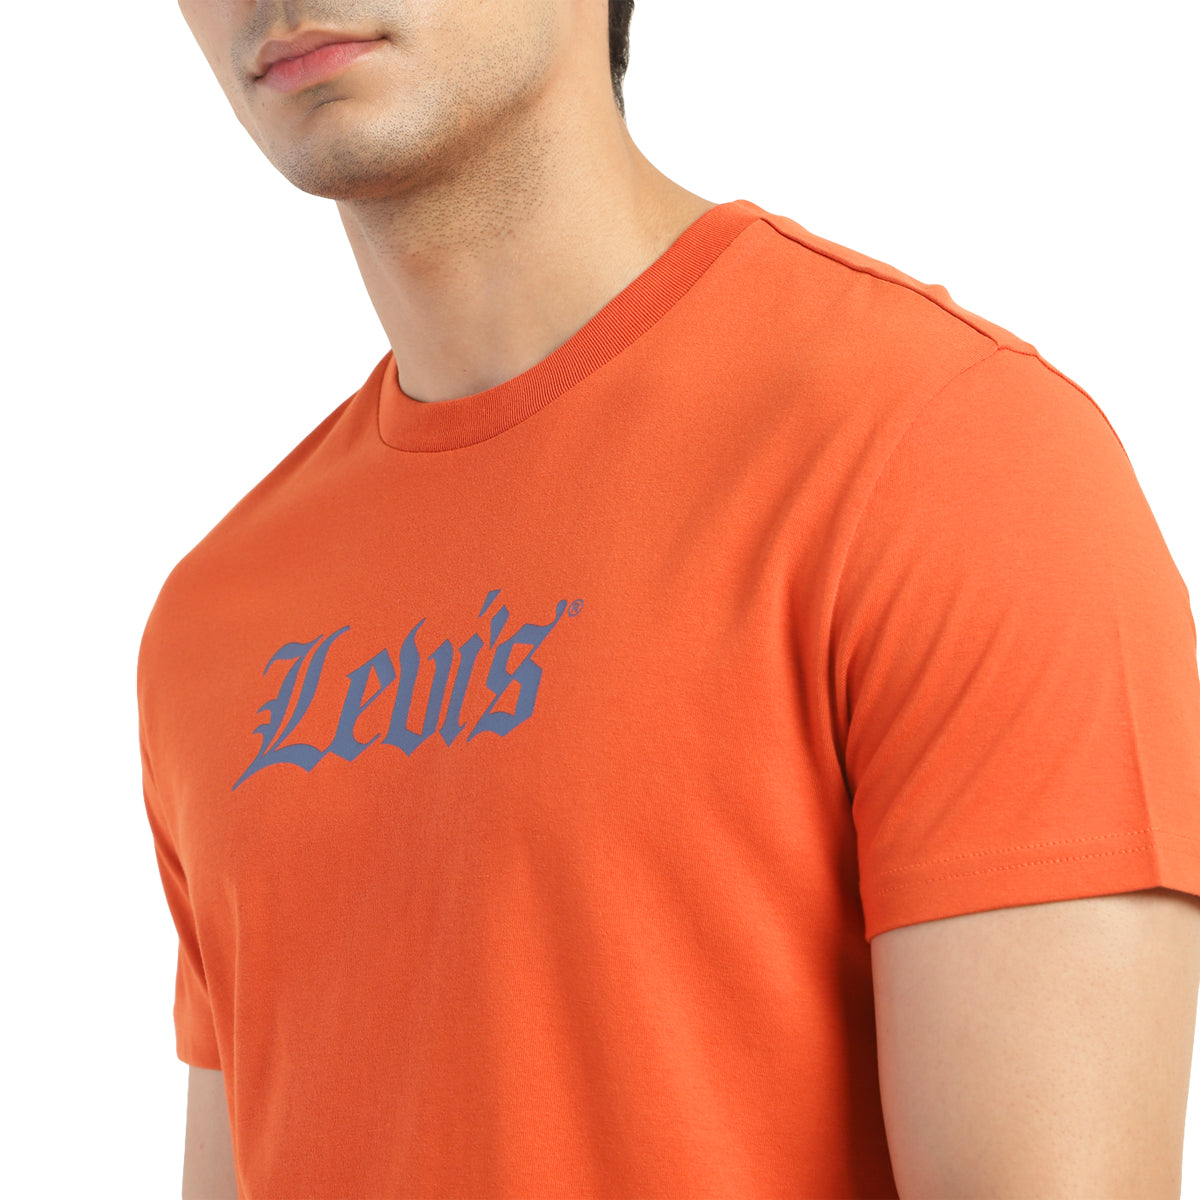 LEVIS GOTHIC BRANDED TEE 16960-0840 T-SHIRT SHORT SLEEVE (M)